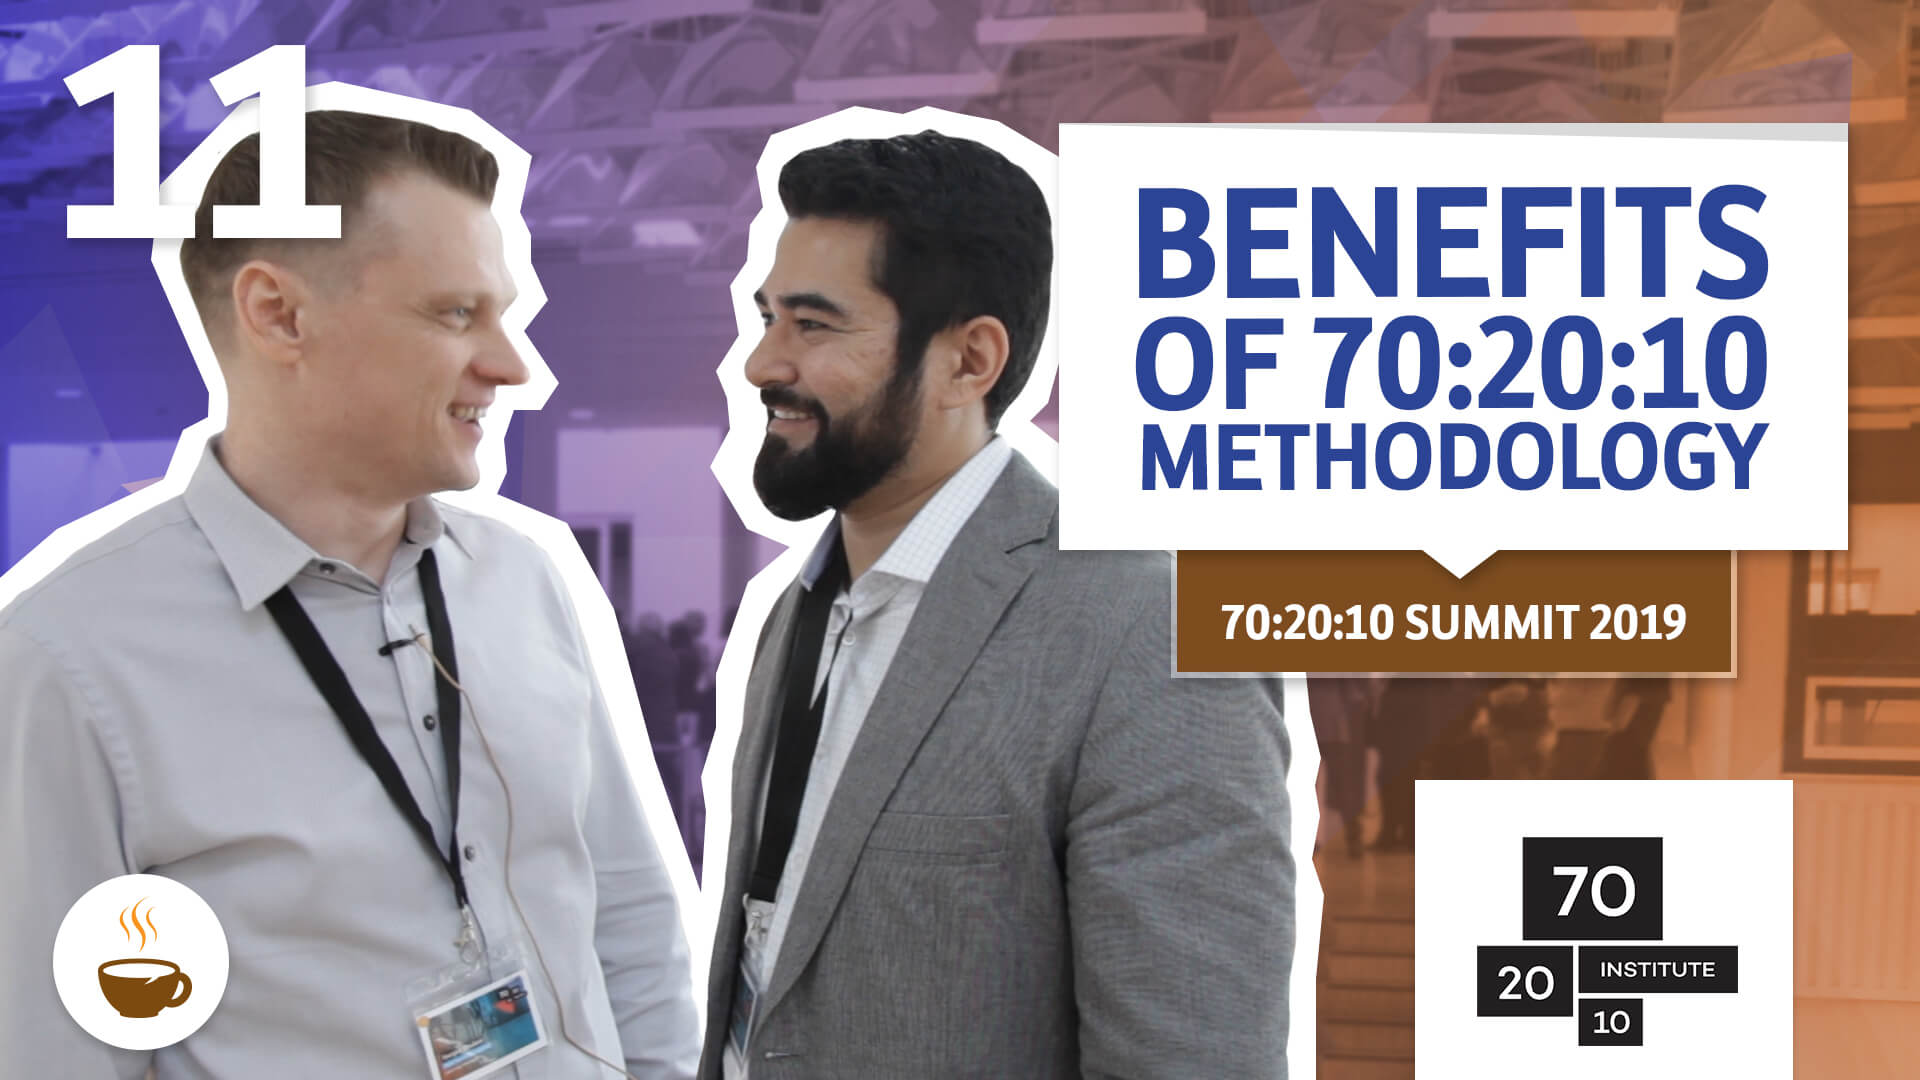 Wagner Cassimiro interviews Sergey about Benefits of 70:20:10 methodology during the 70:20:10 Summit, 2019